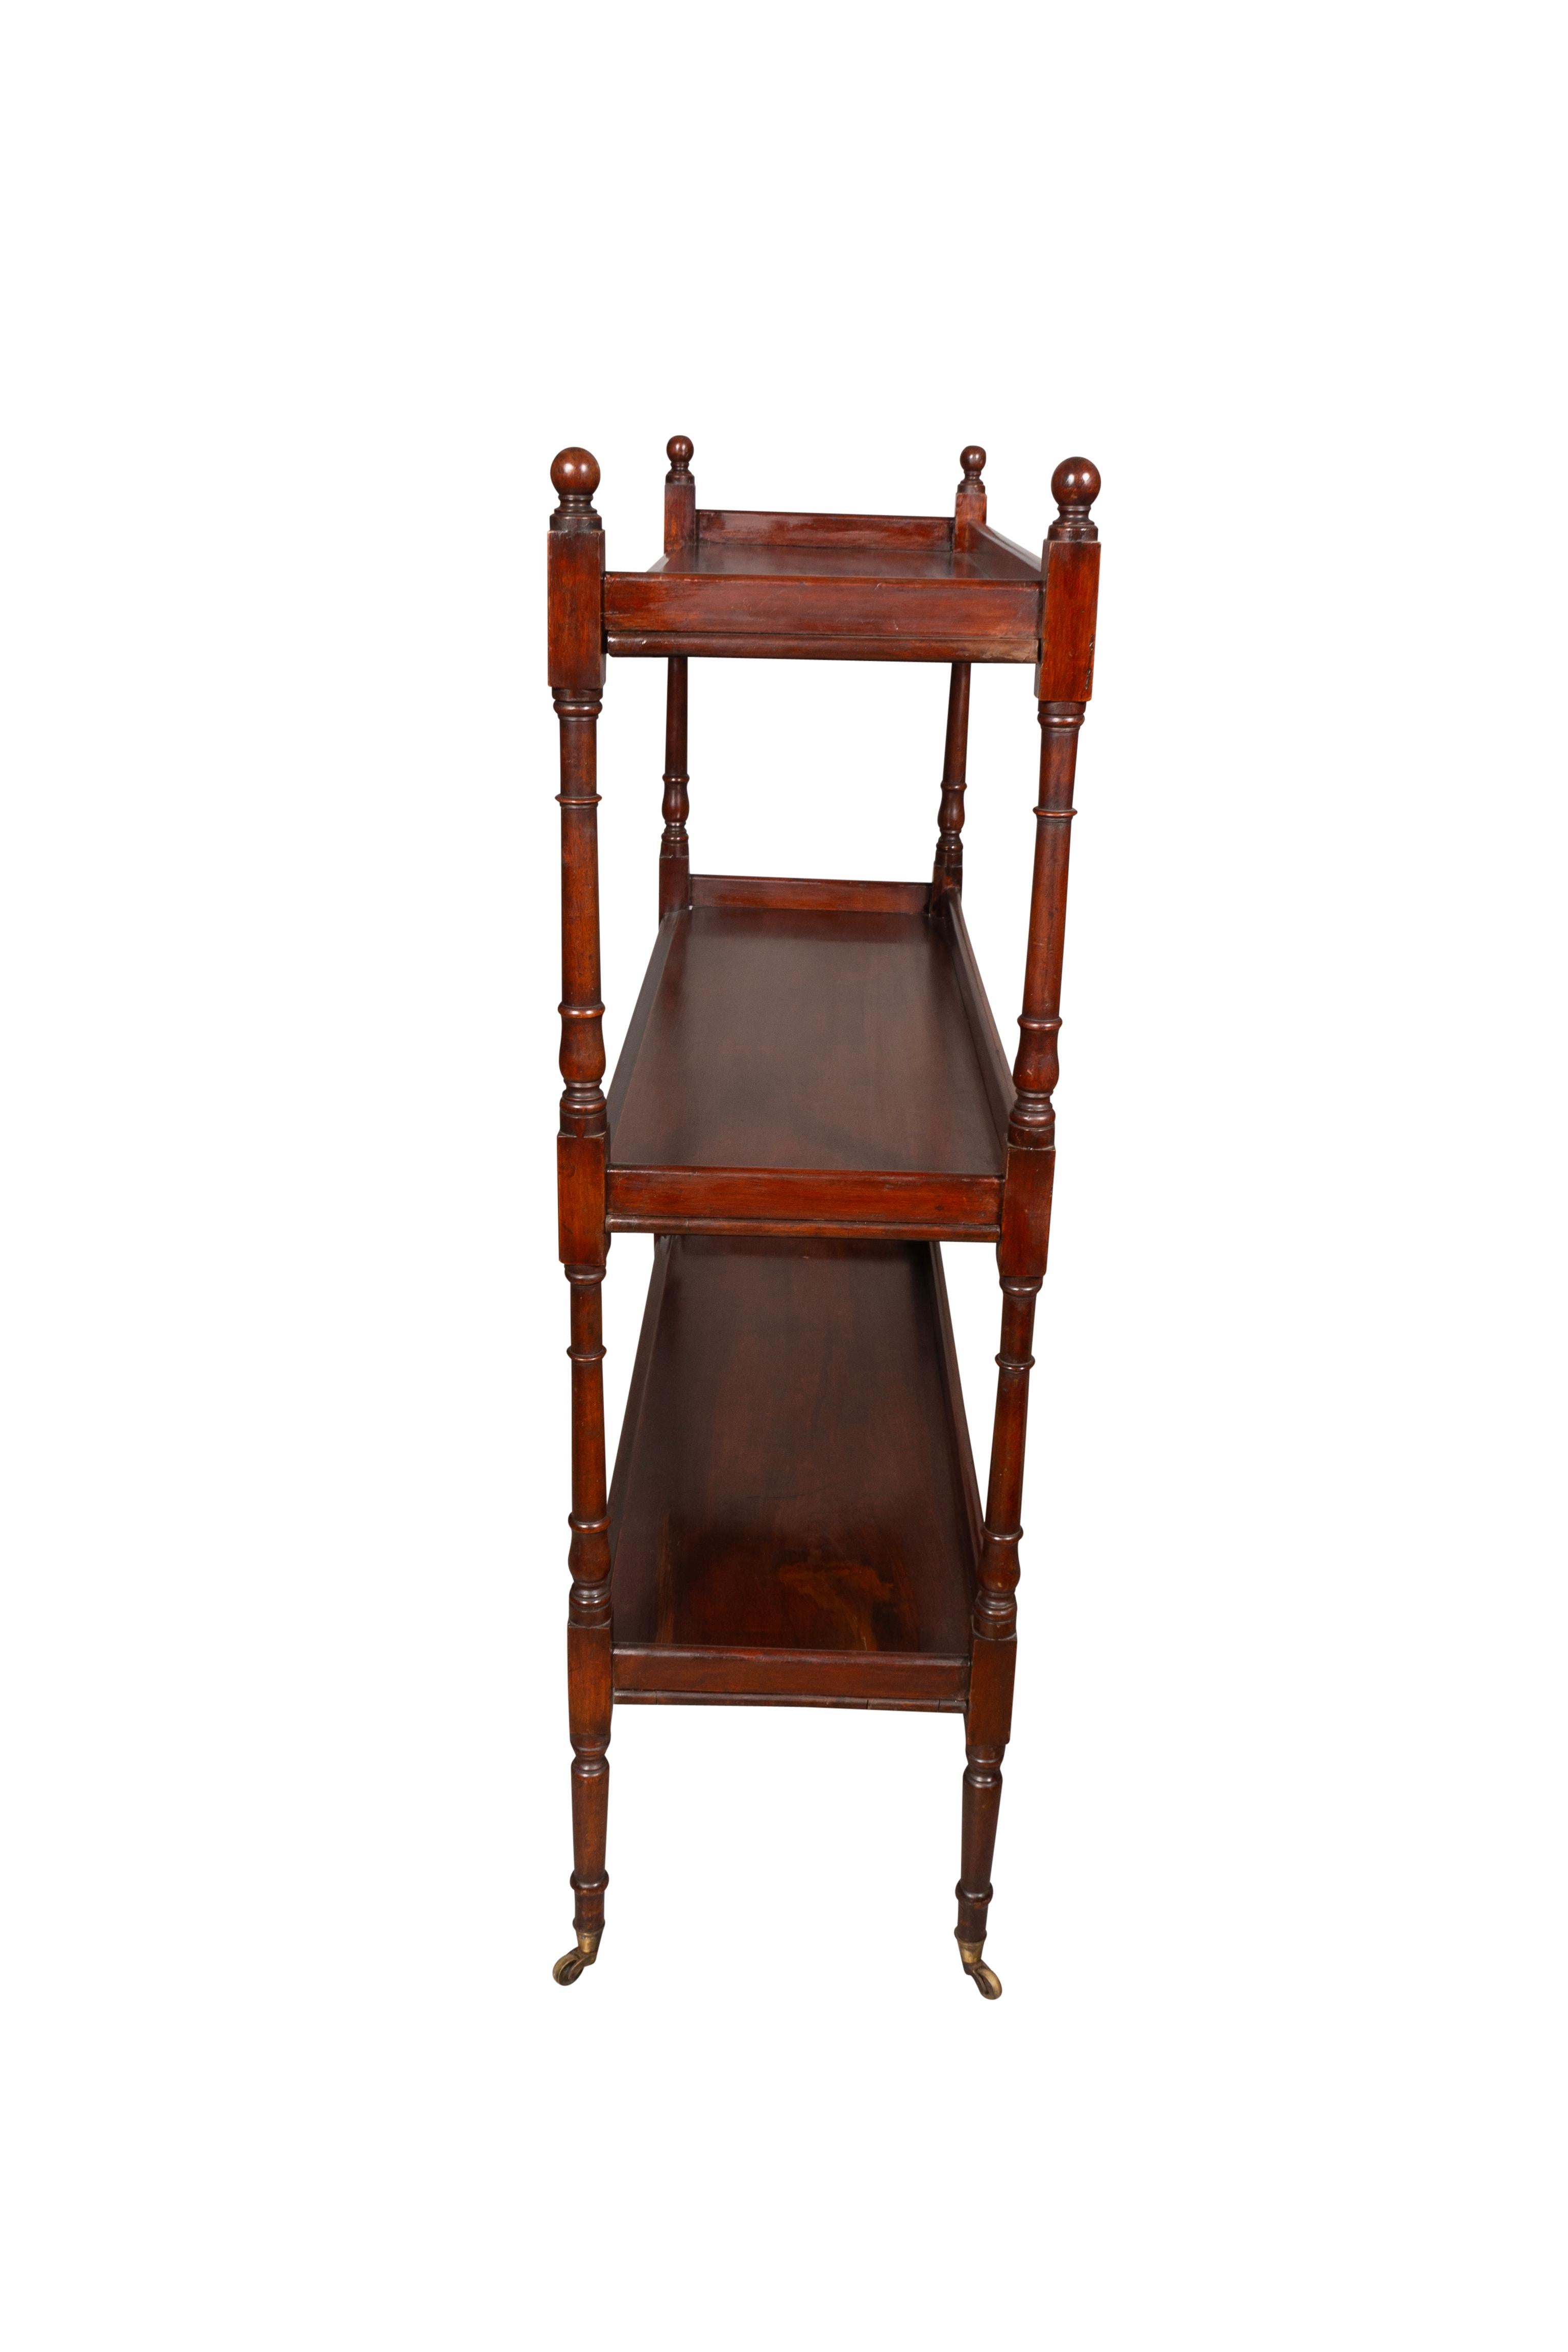 Late 18th Century George III Mahogany Etagere For Sale